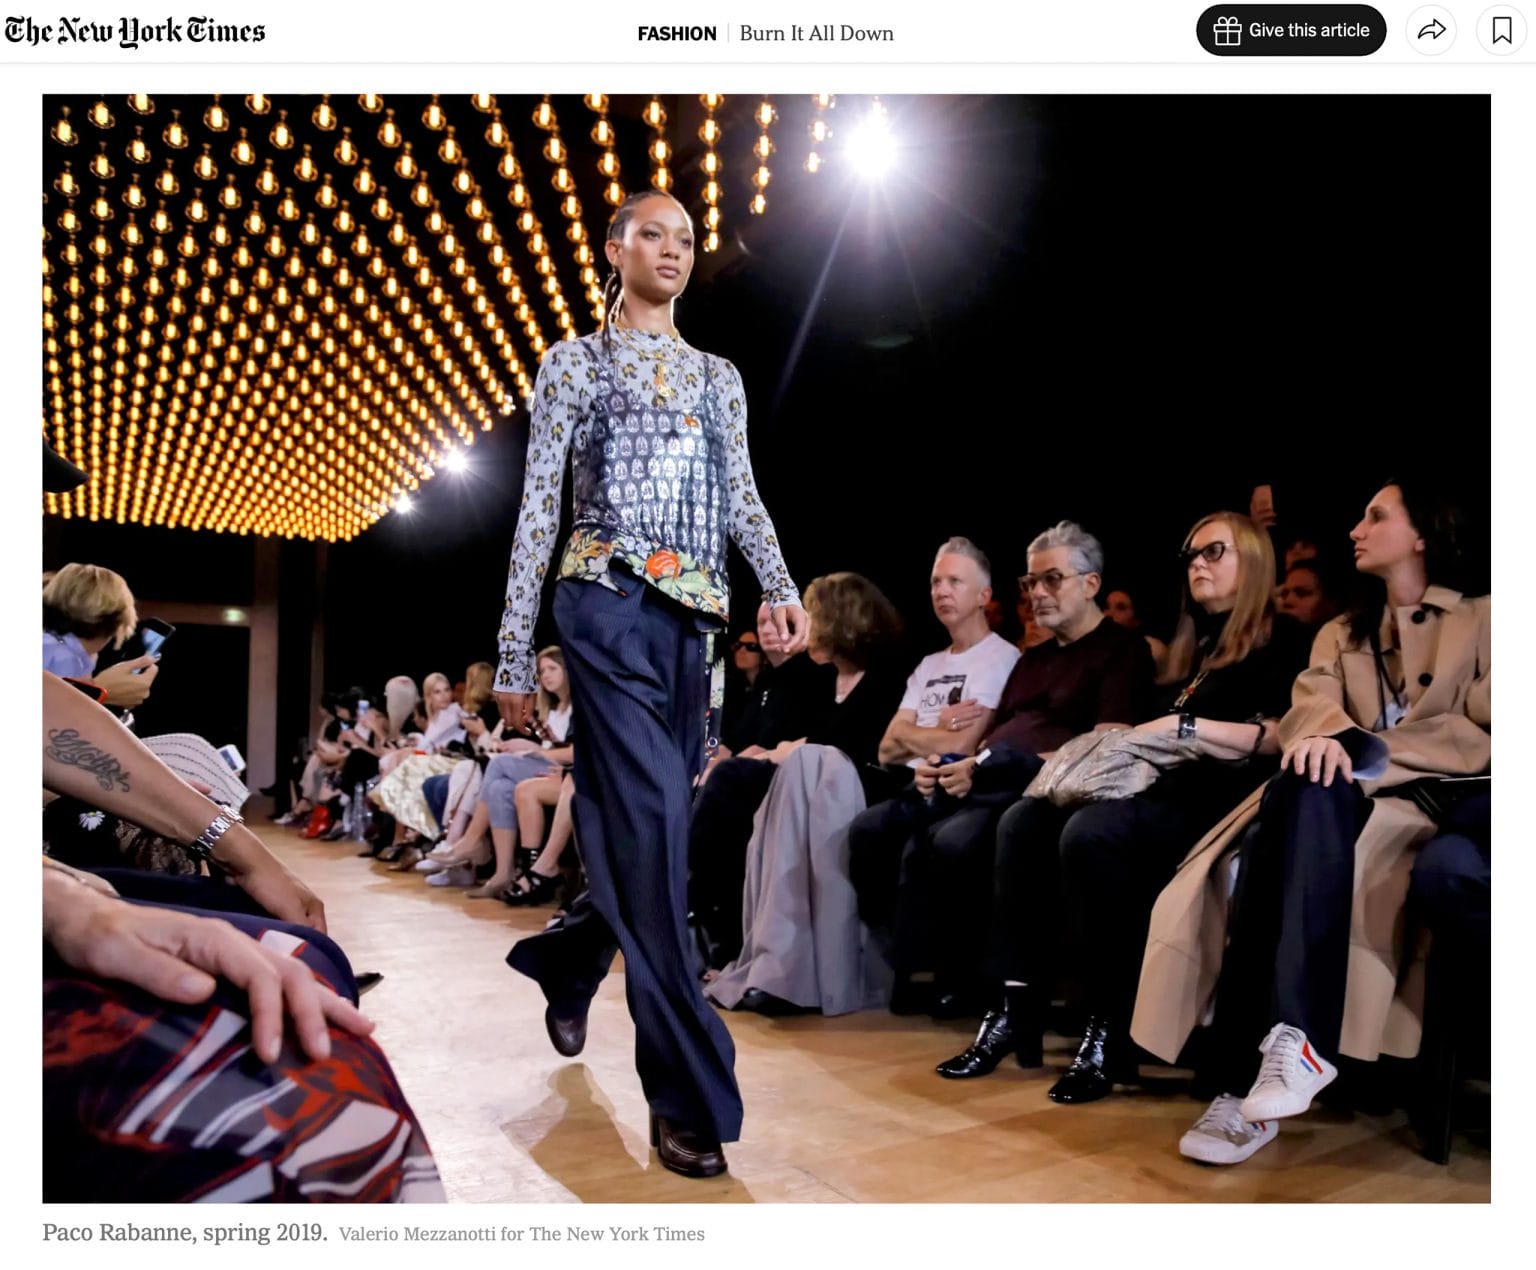 Paco Rabanne Fashion Show, Photo by Valerio Mezzanotti for The New York Times